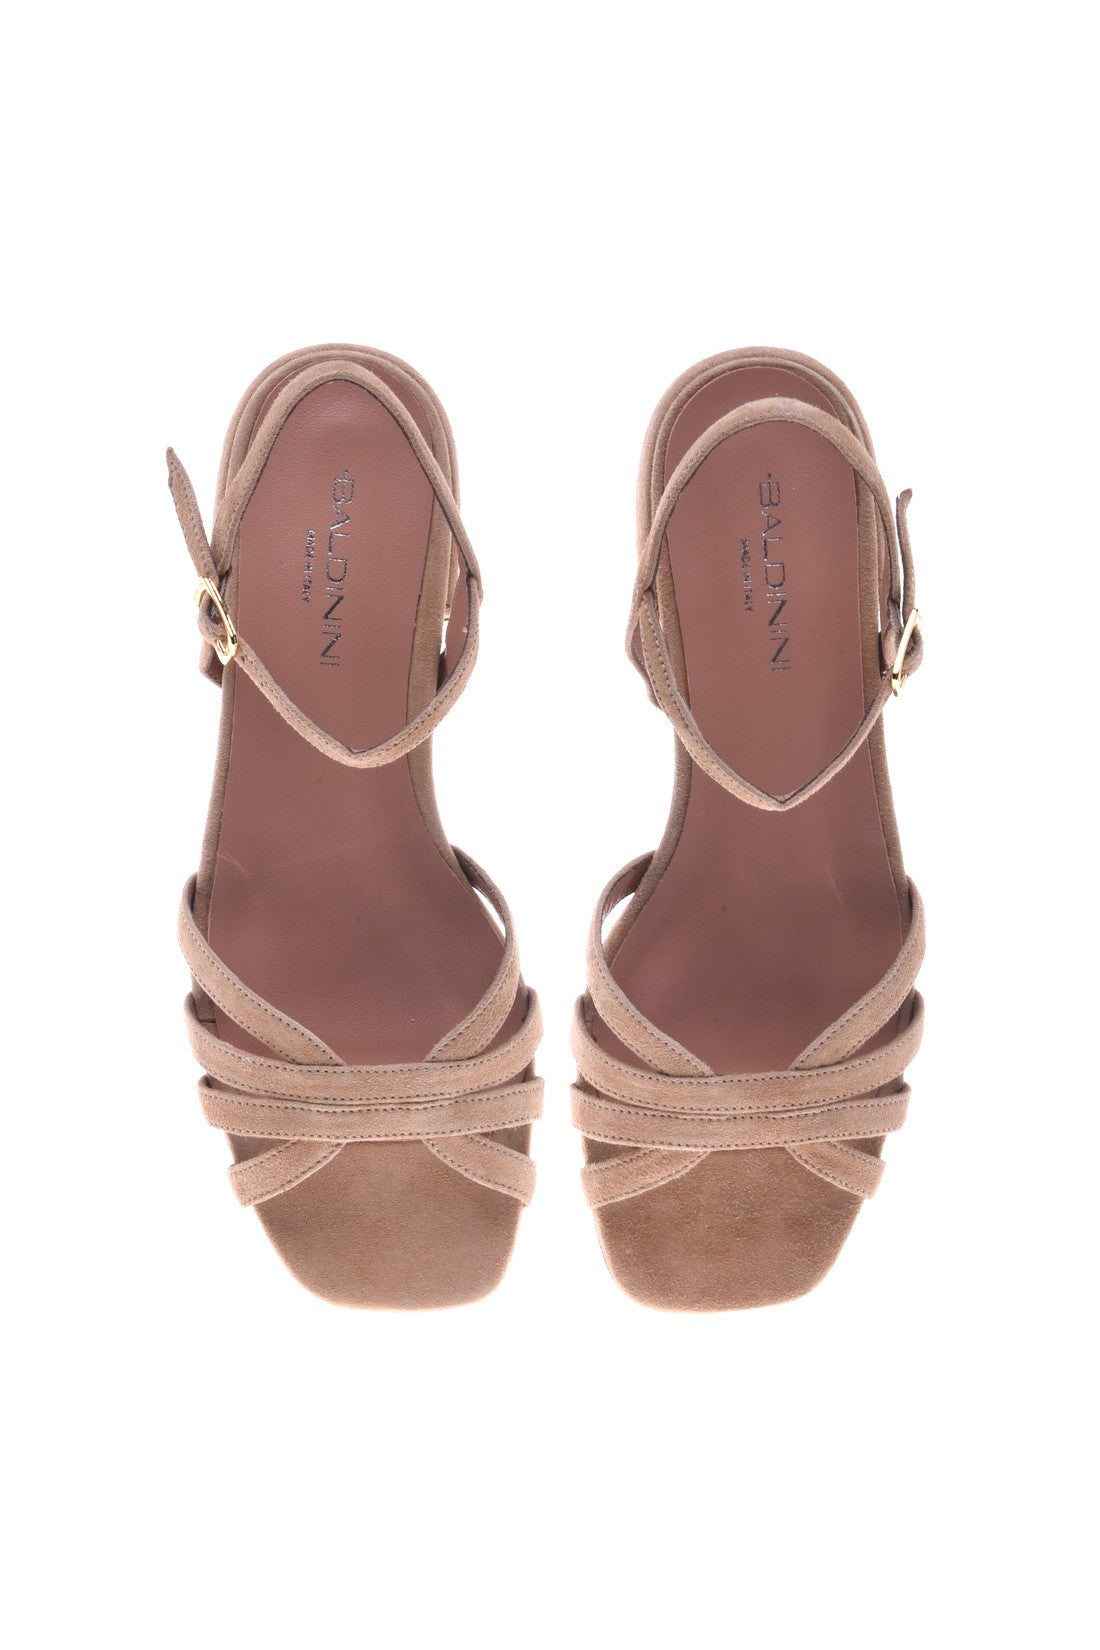 Sandal in taupe suede